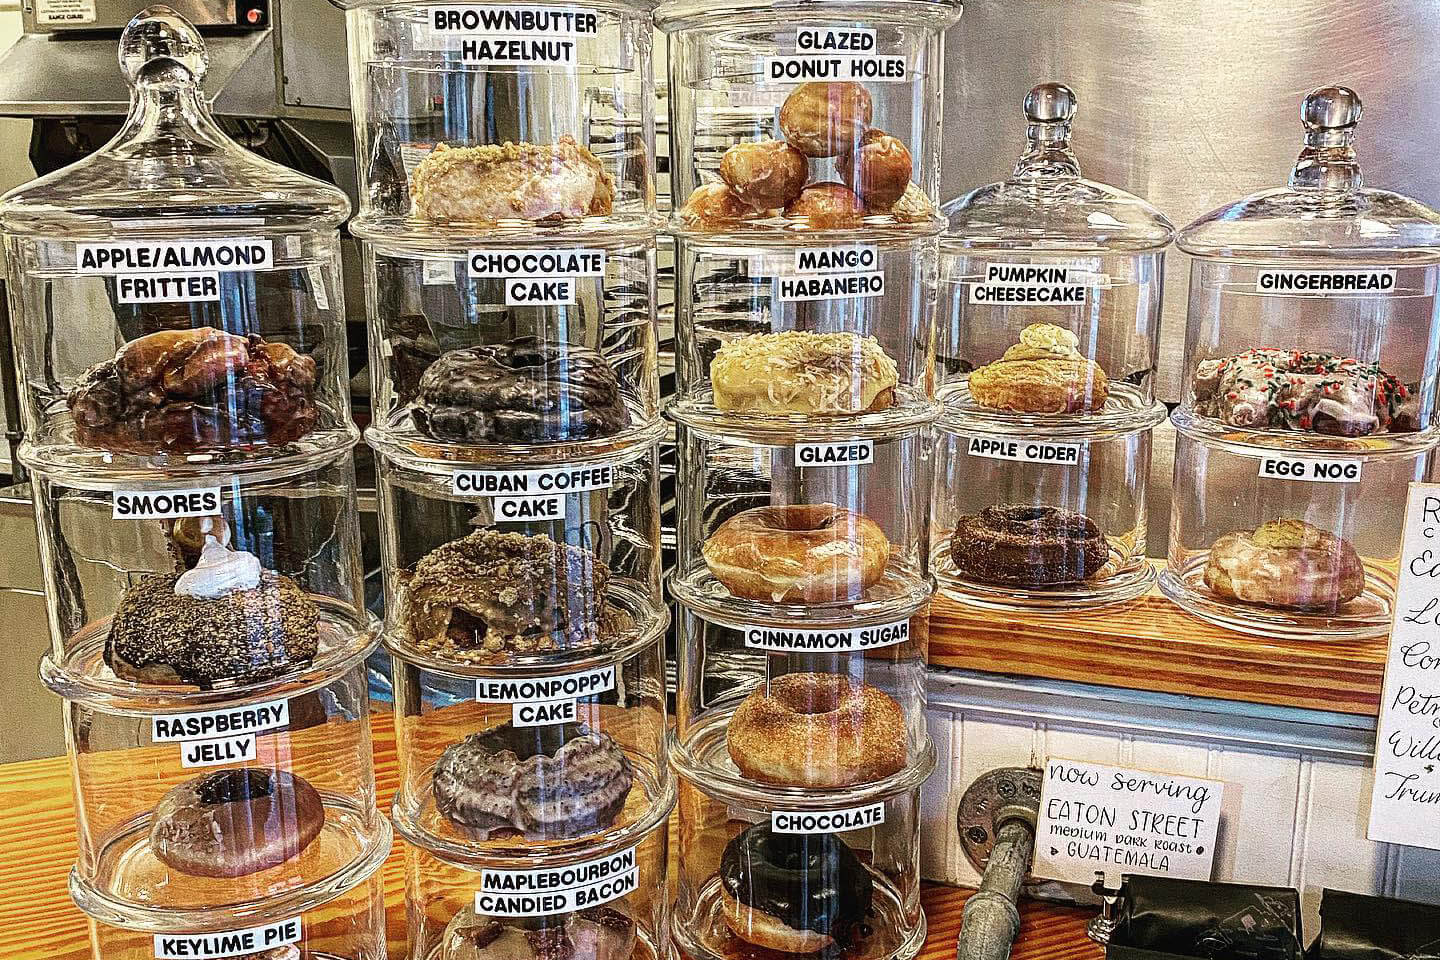 Donuts in glass containers. Labels on containers read Apple/Almond Fritter, Smores, Raspberry Jelly, Kyelime Pie, Bownbutter Hazelnut, Chocolate Cake, Cuban Coffee Cake, Lemon Poppy Cake, Maple Bourbon Candied Bacon, Glazed Donut Holes, Mango Habanero, Glazed, Cinnamon Sugar, Chocolate, Pumpkin cheesescake, Apple Cider, Gingerbread, and Egg Nog. 